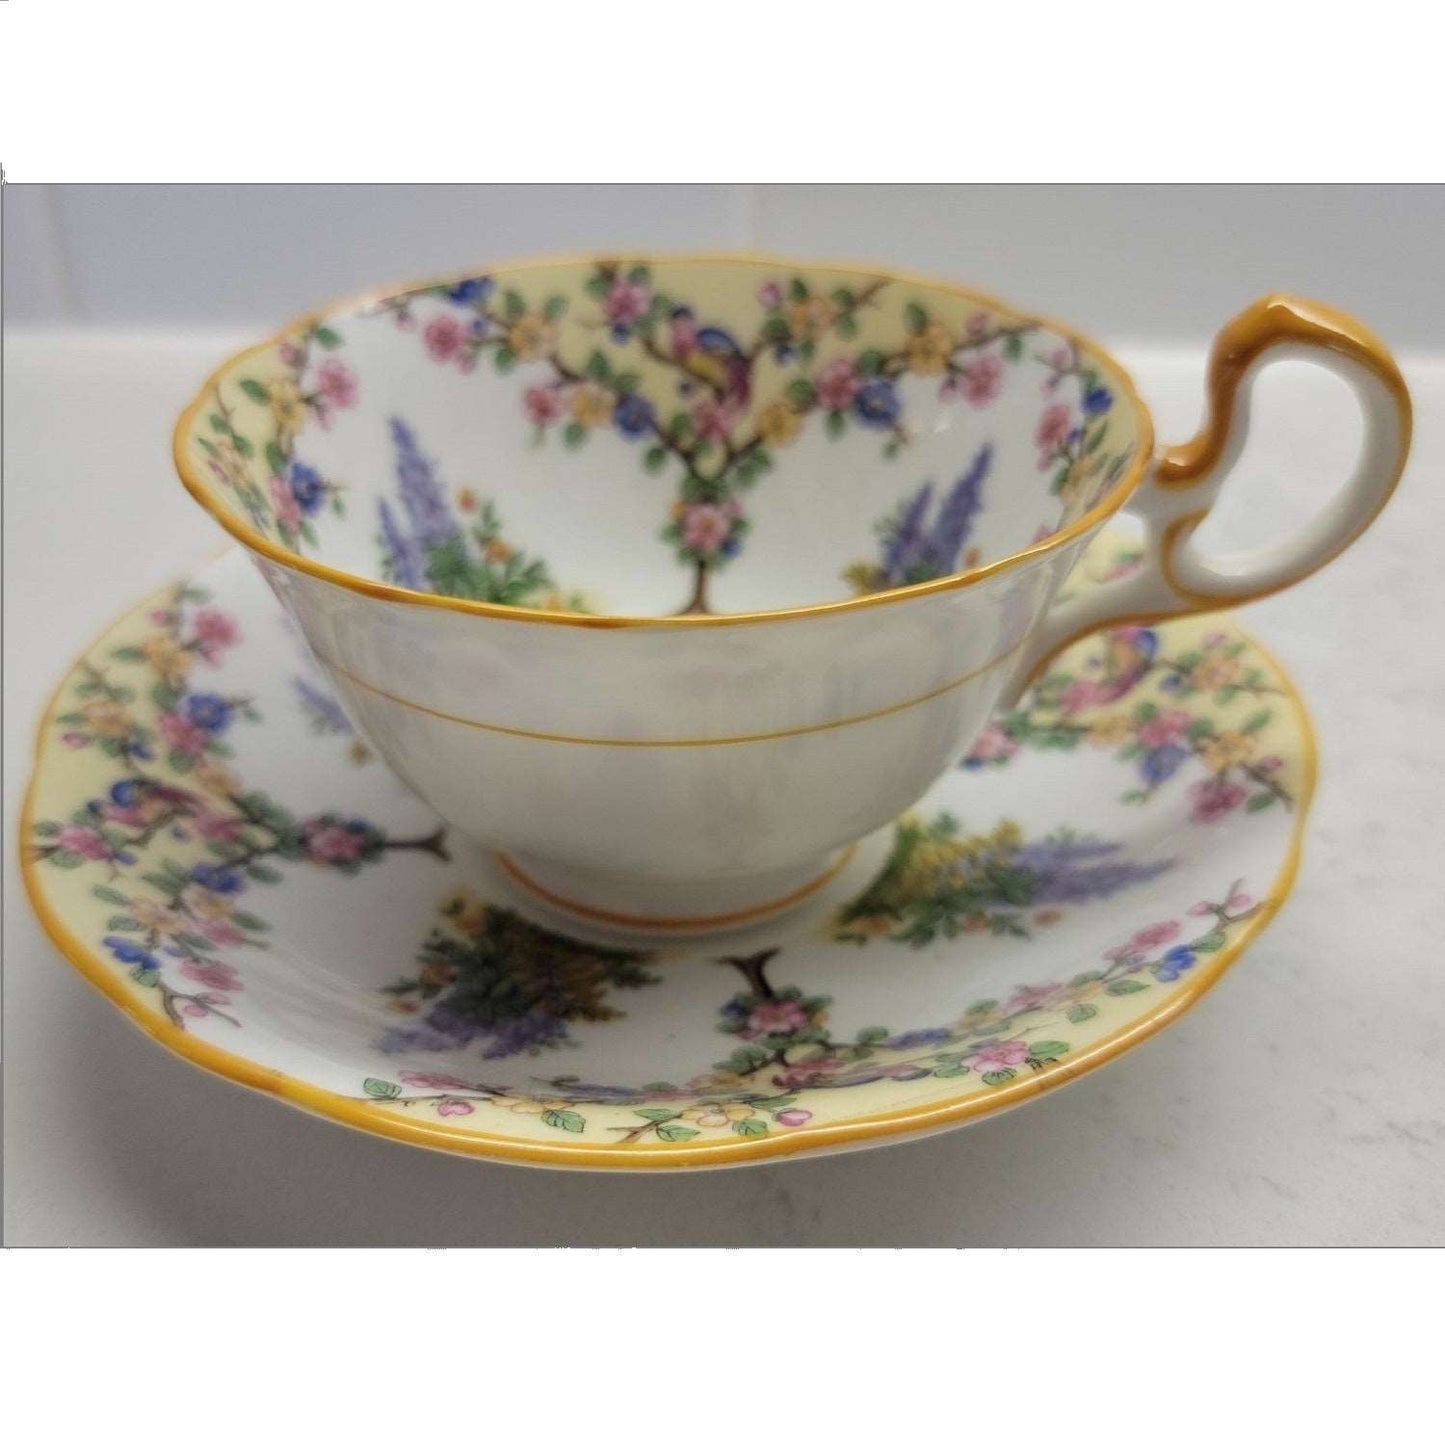 Aynsley Bird and Lupin Vintage Tea Cup and Saucer Set